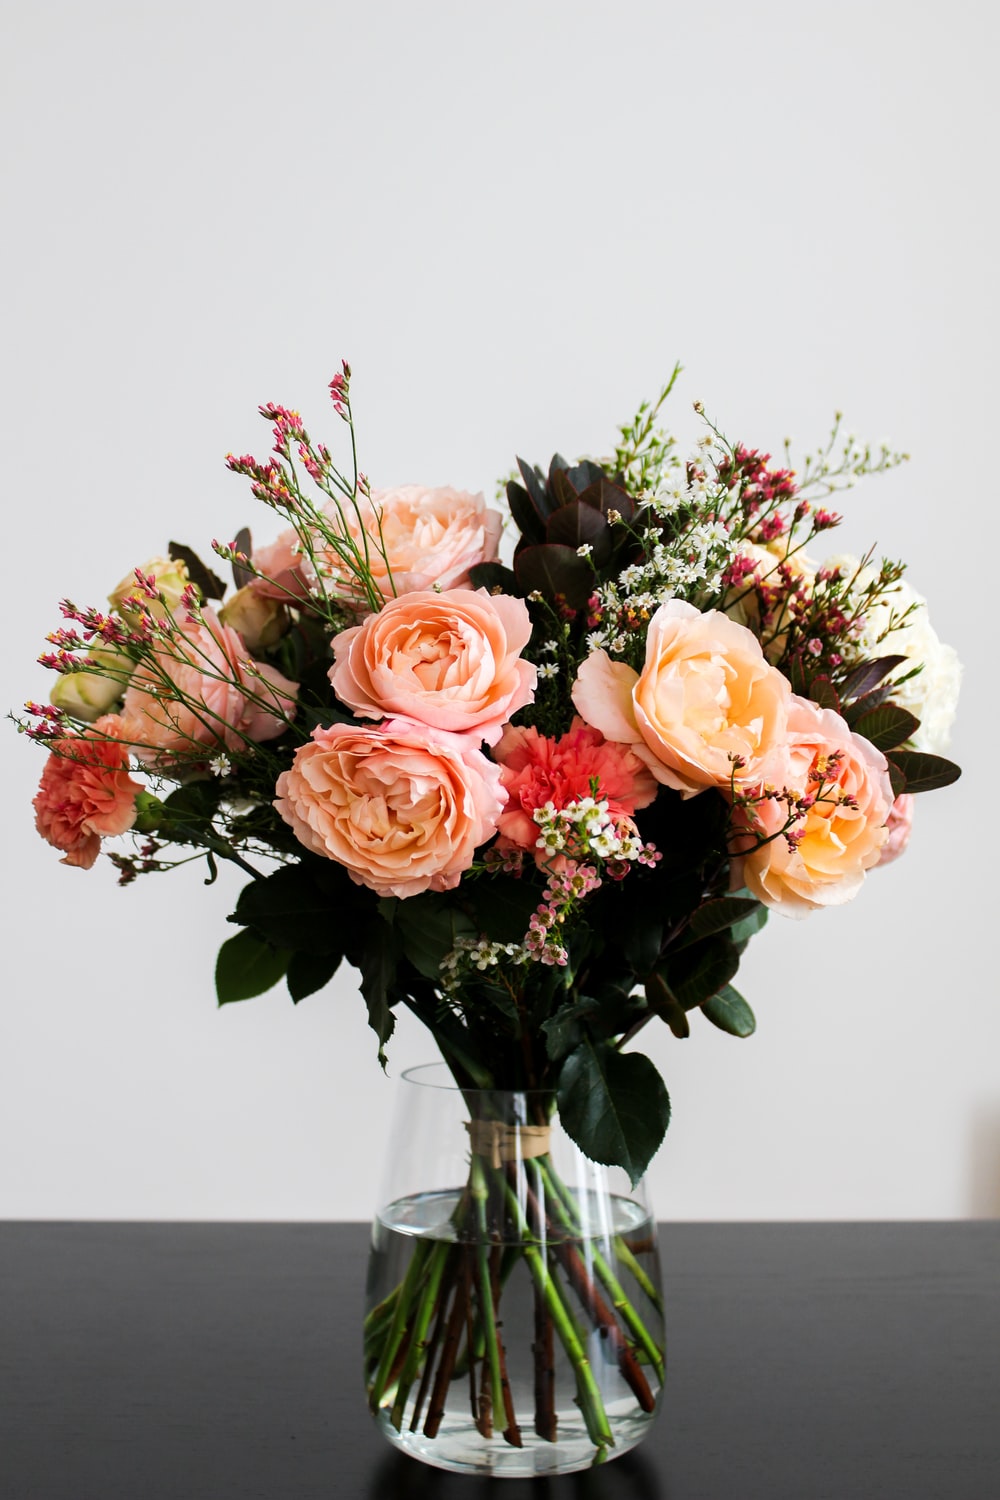 Bouquet Of Flowers Picture. Download Free Image